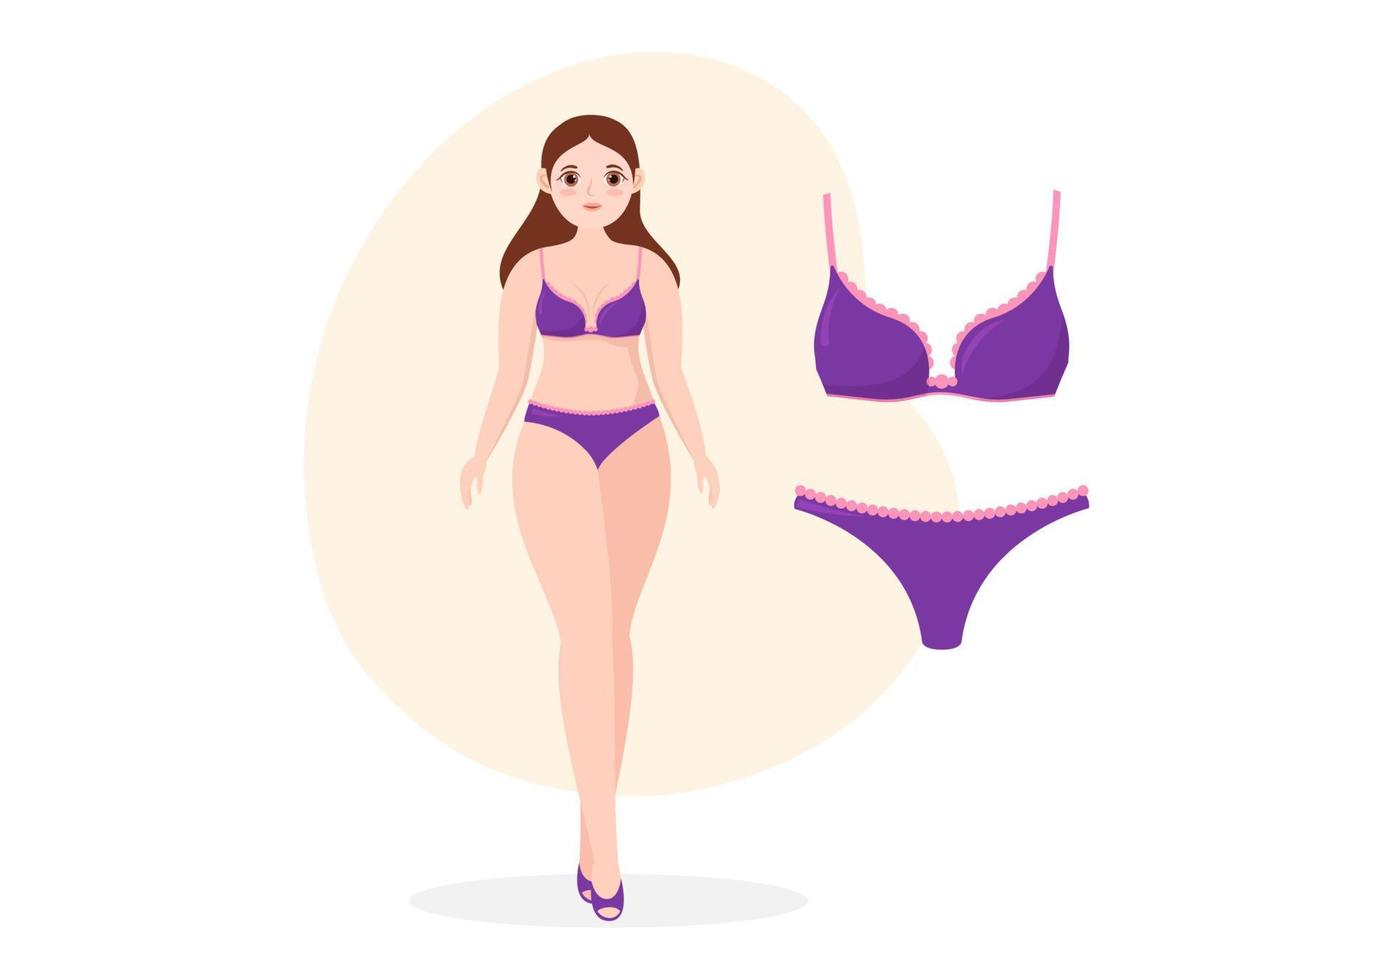 Collection of Stylish Woman Lingerie, Bra and Undies Underwear with Pink and Purple Color on Flat Cartoon Hand Drawn Templates Illustration vector